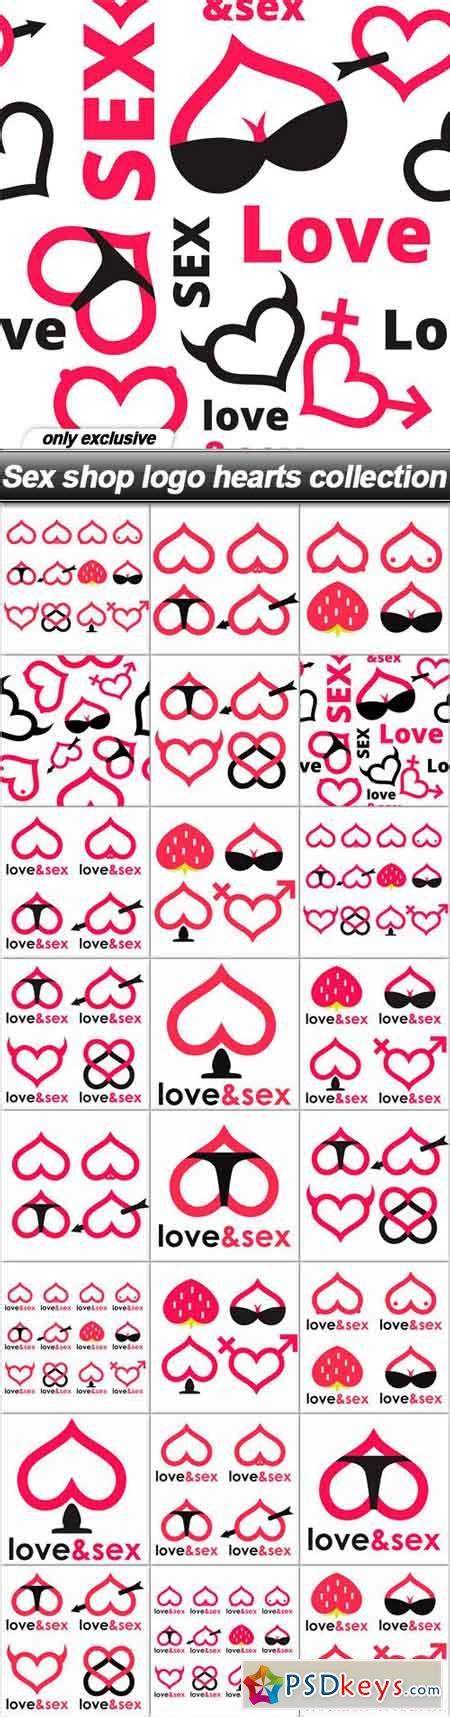 sex shop logo hearts collection 25 eps free download photoshop free download nude photo gallery